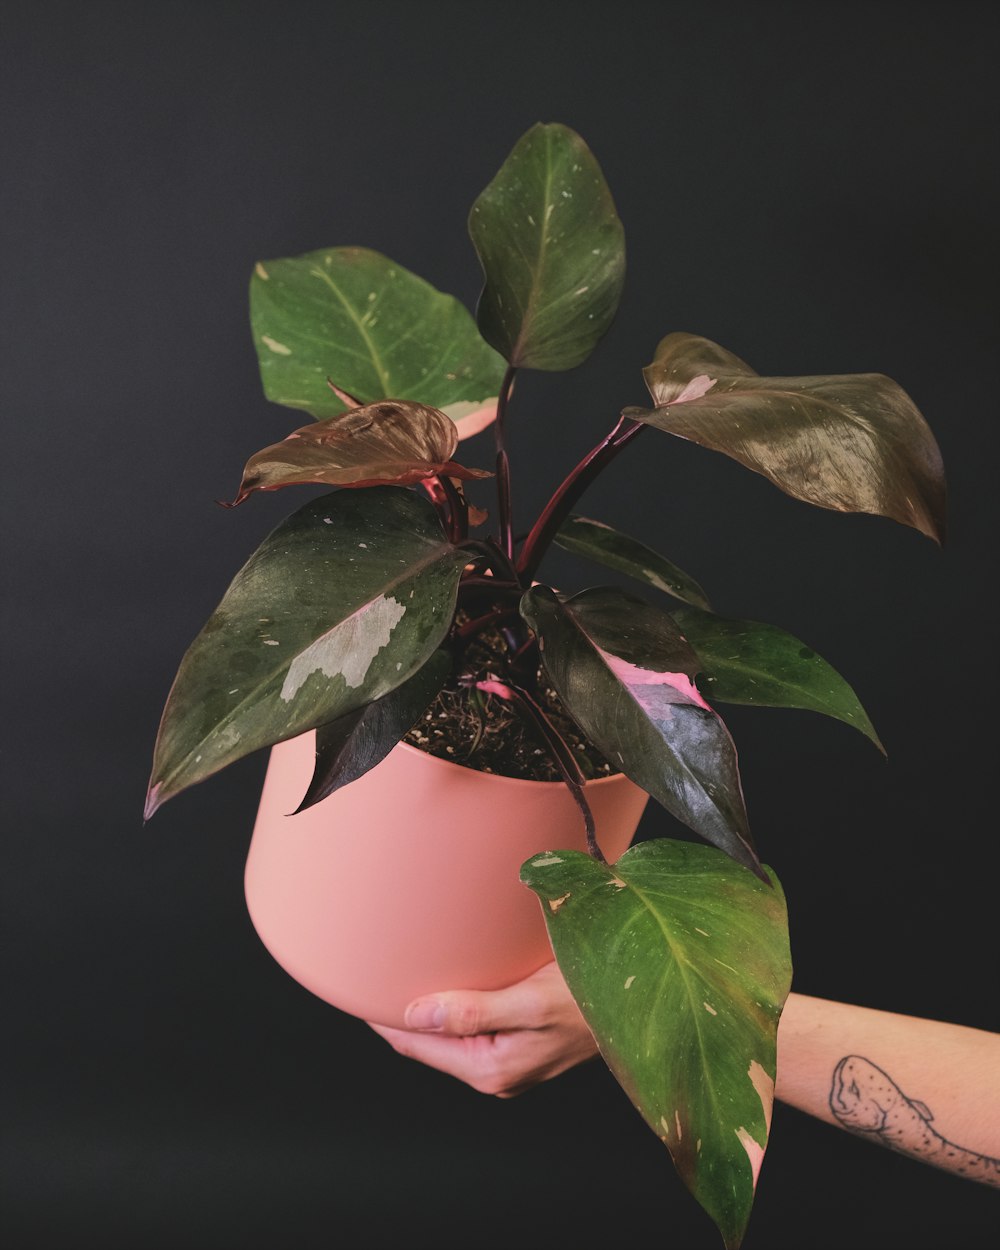 a person holding a potted plant with green leaves